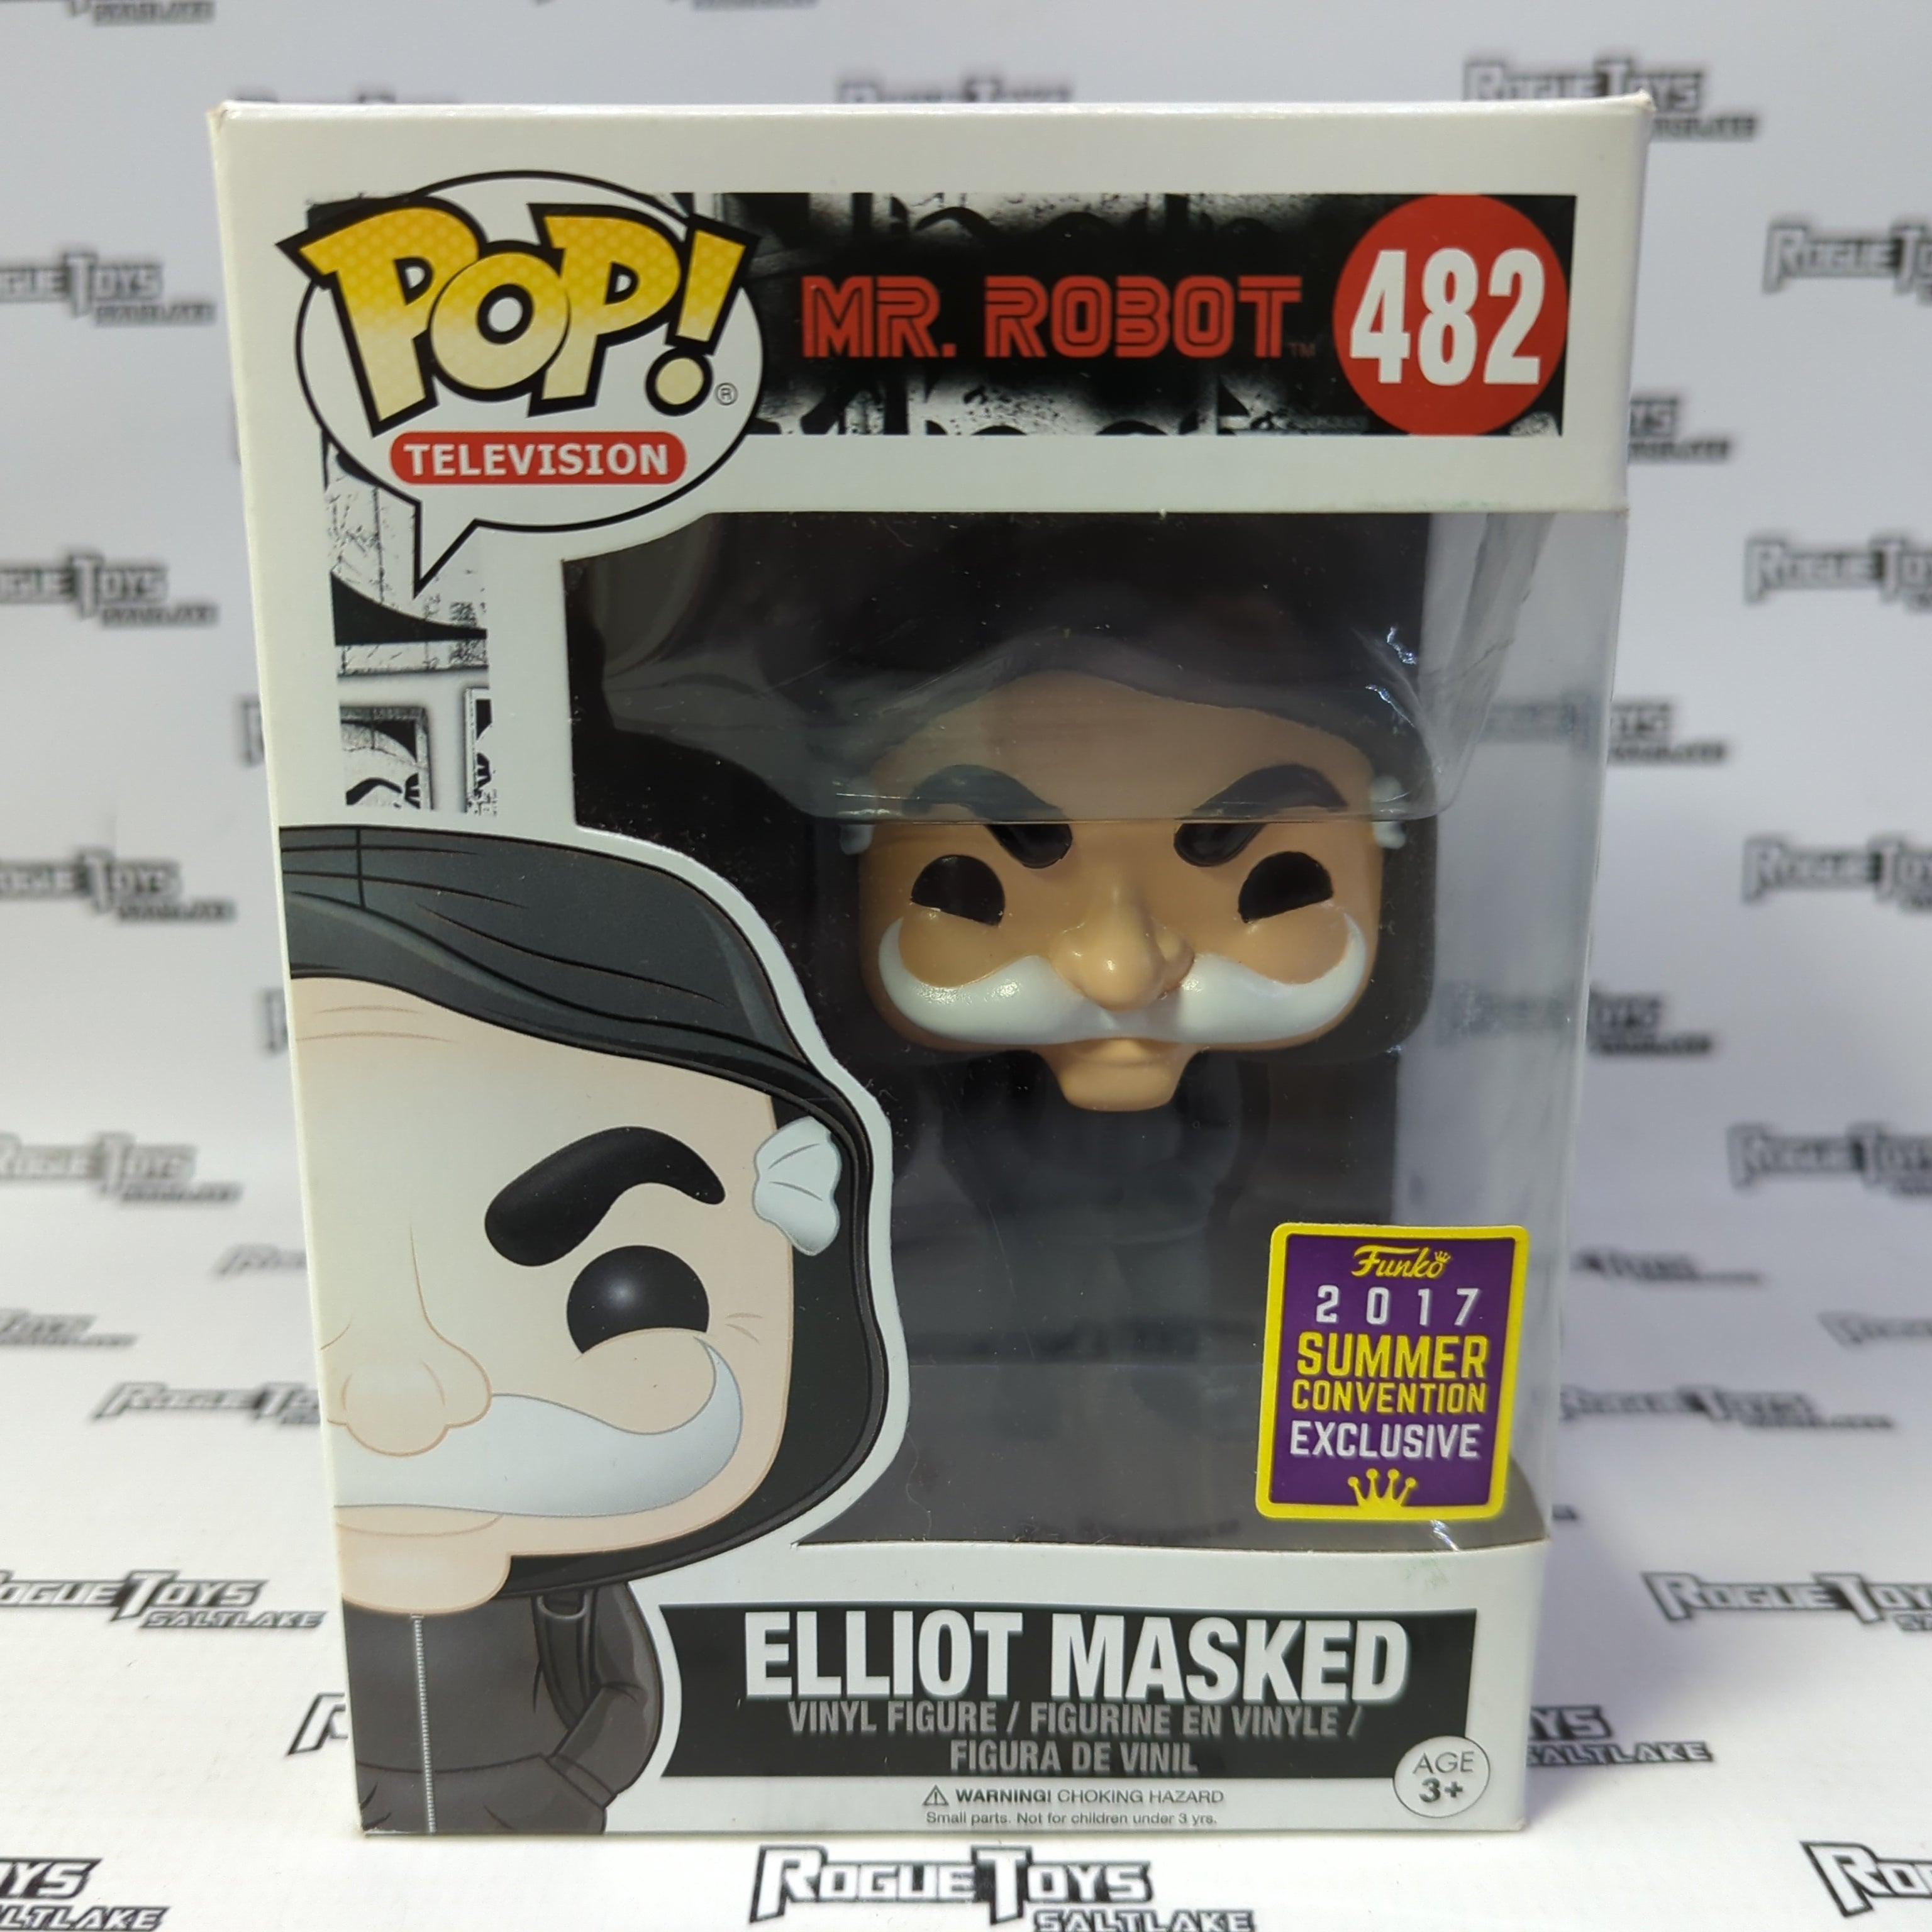 Funko POP! Television Mr. Robot Elliot Masked (Funko 2017 Summer Convention Exclusive) 482 - Rogue Toys